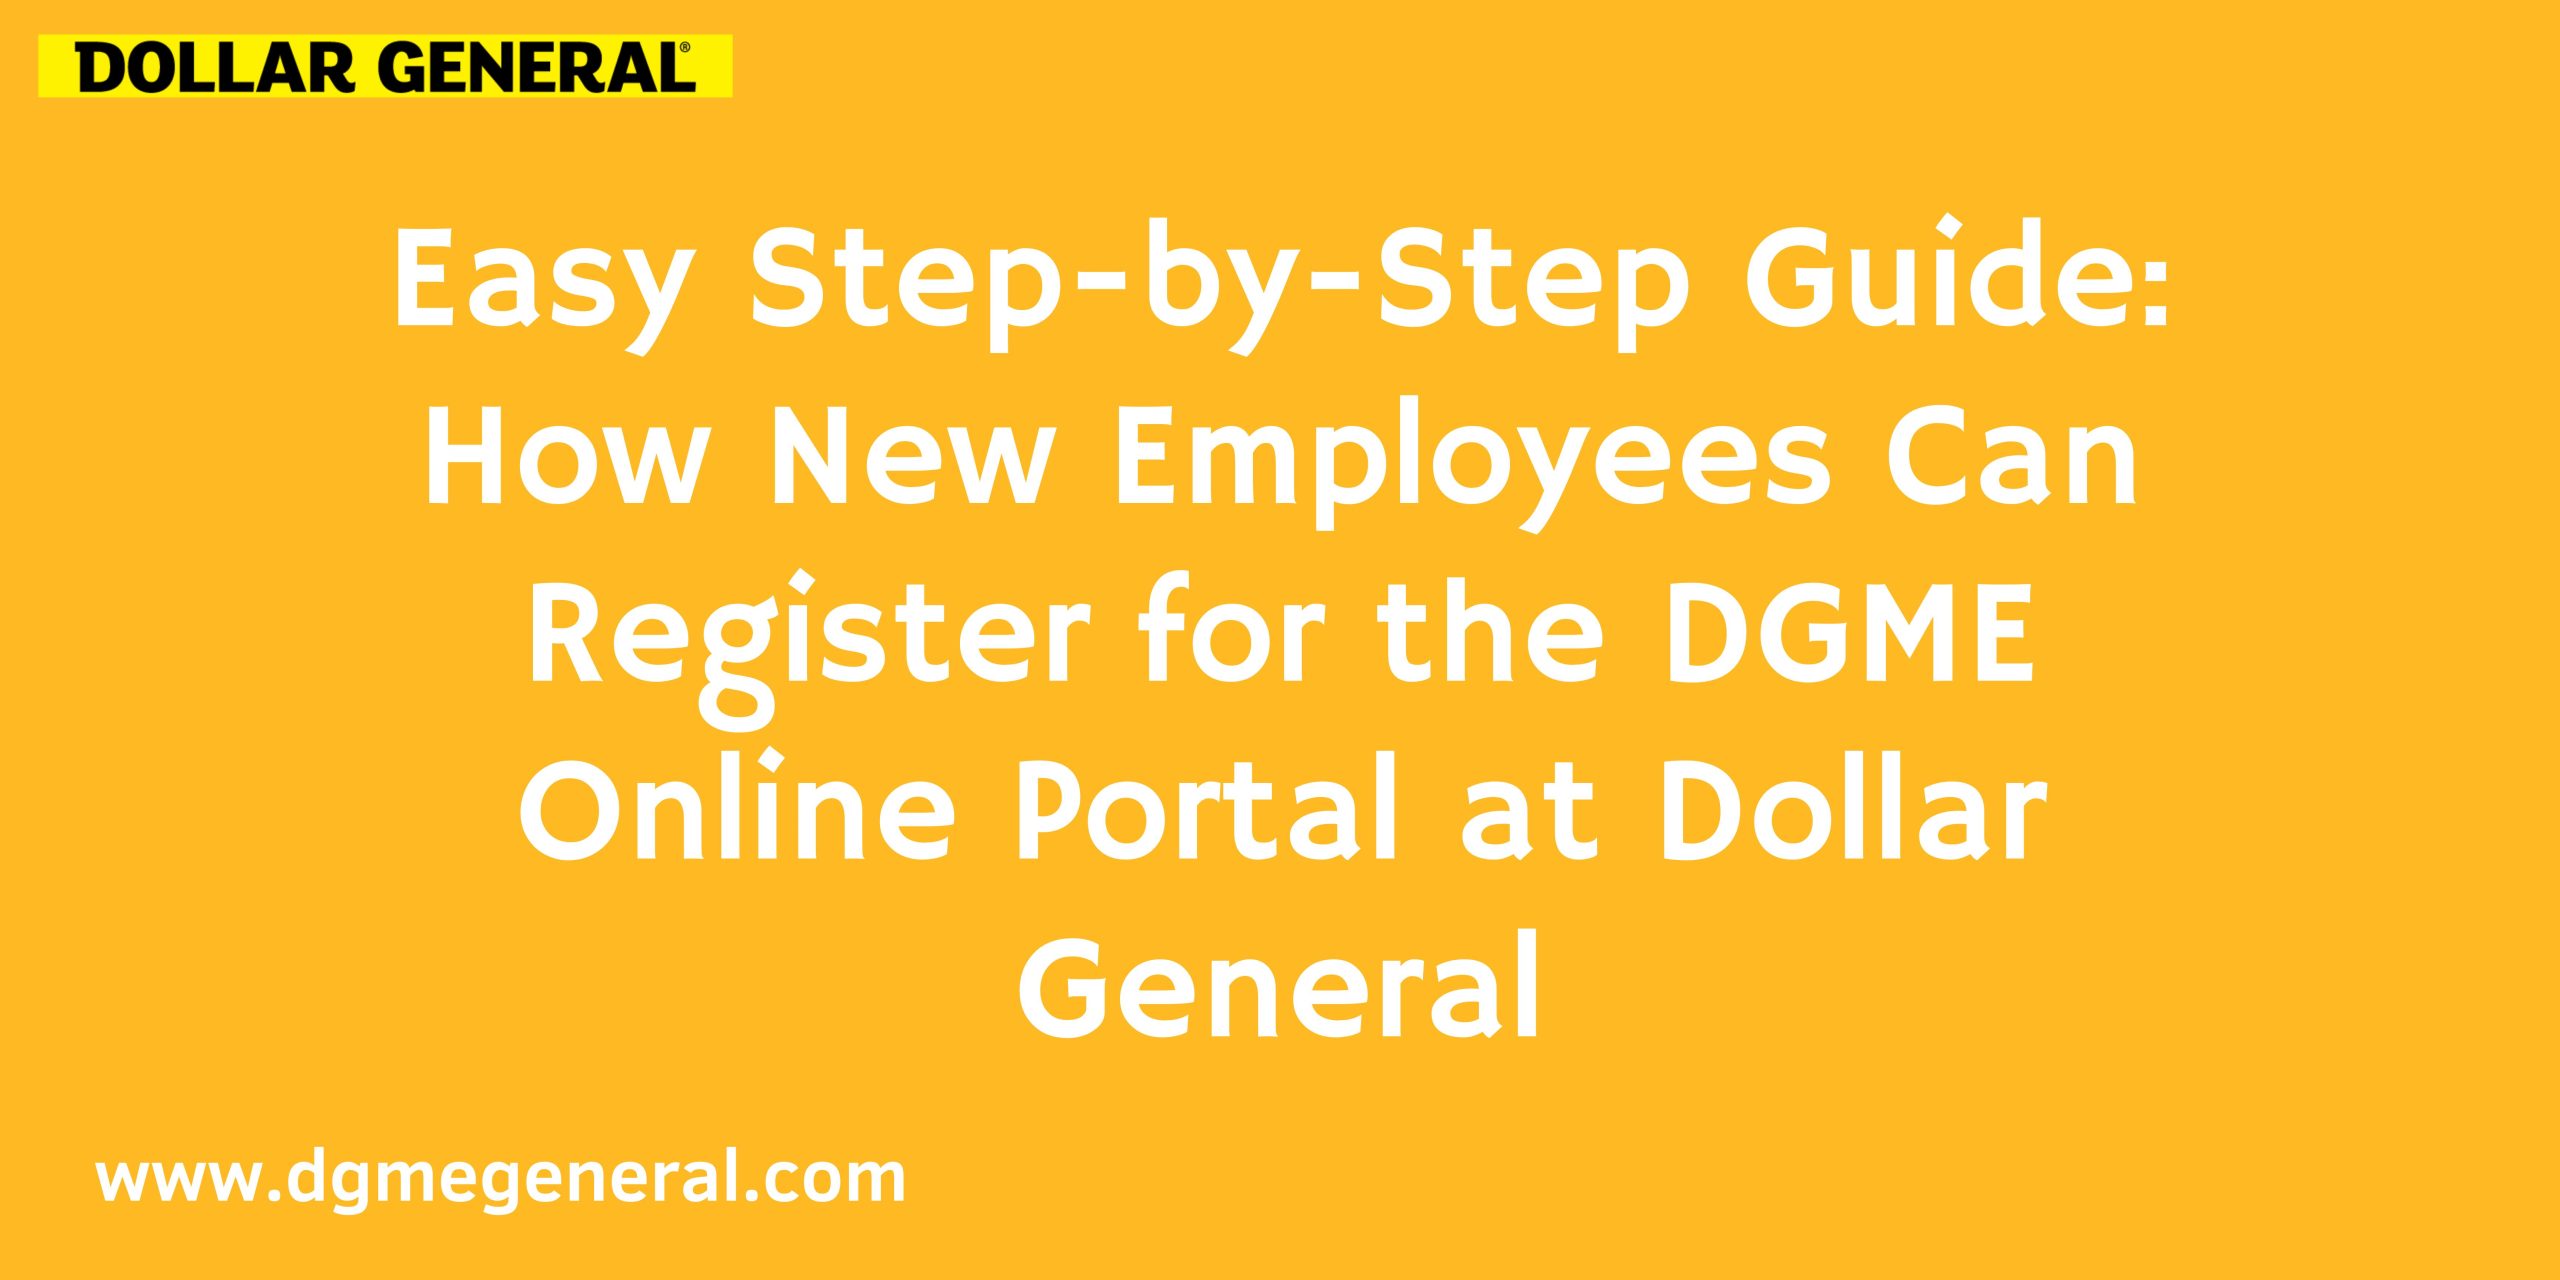 Easy Step-by-Step Guide How New Employees Can Register for the DGME Online Portal at Dollar General